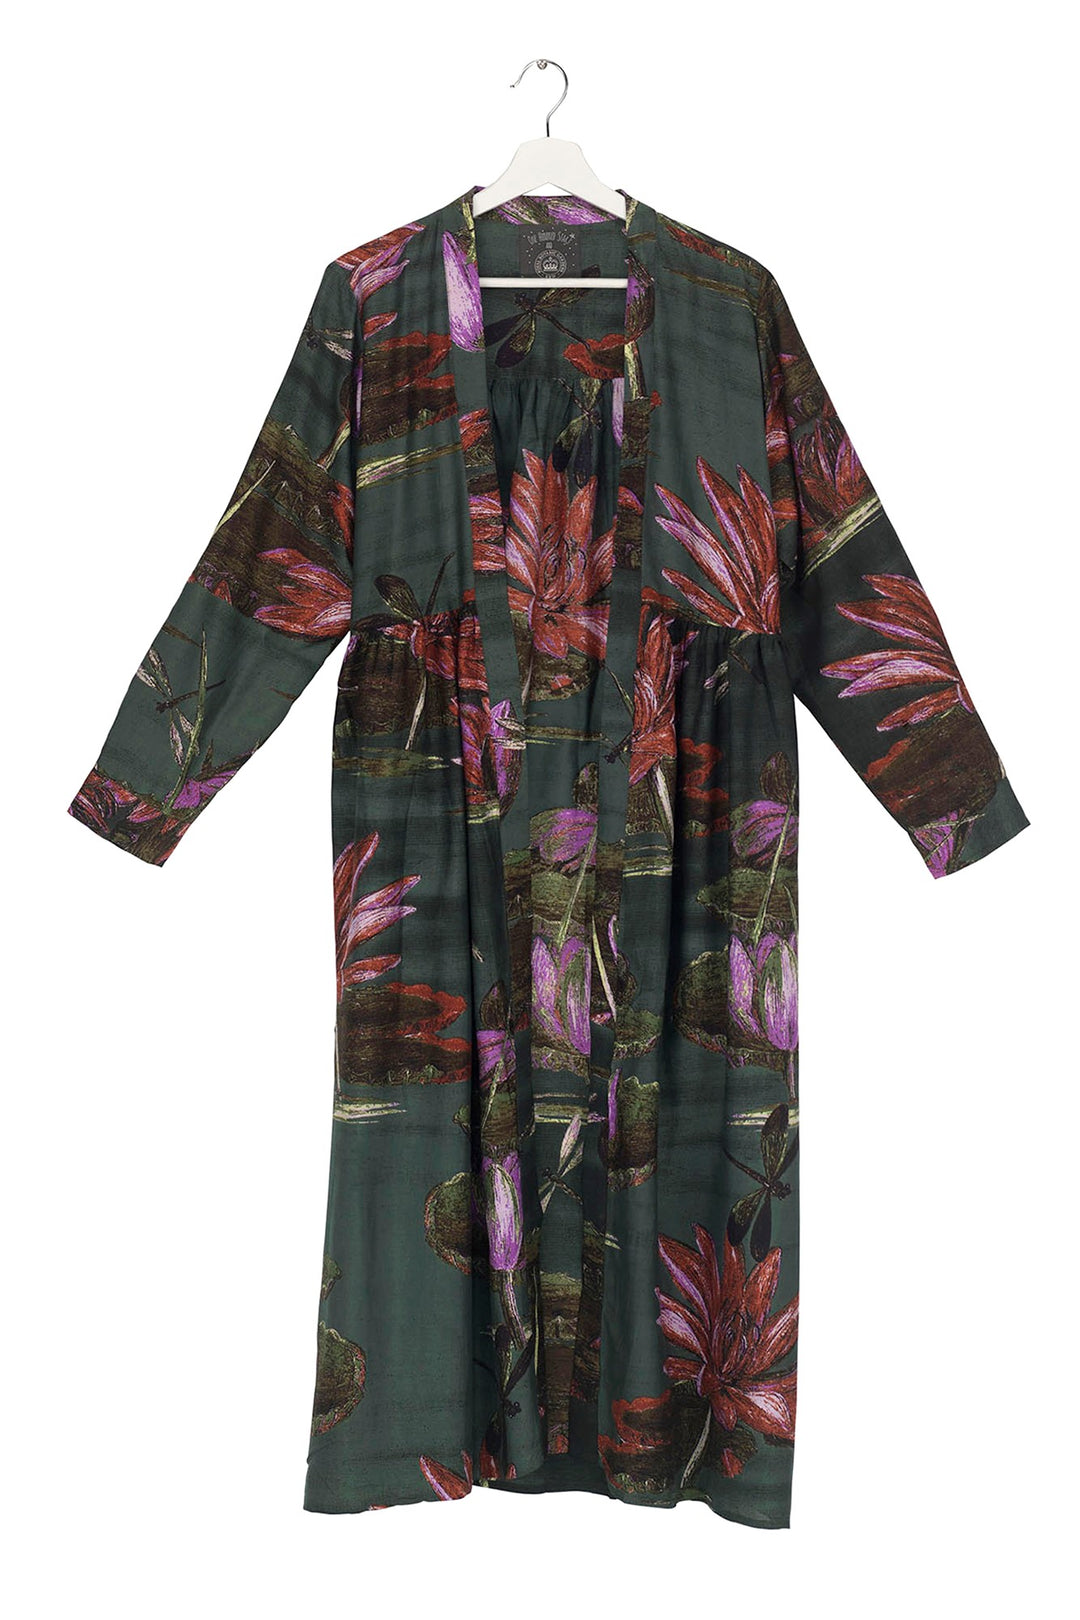 Marianne North Indian Lily Duster Coat- This stunning shape is both stylish and versatile, whether you choose to wear our duster coat as a luxurious house coat, as part of a chic ensemble during the day or over a little black dress during the evening.